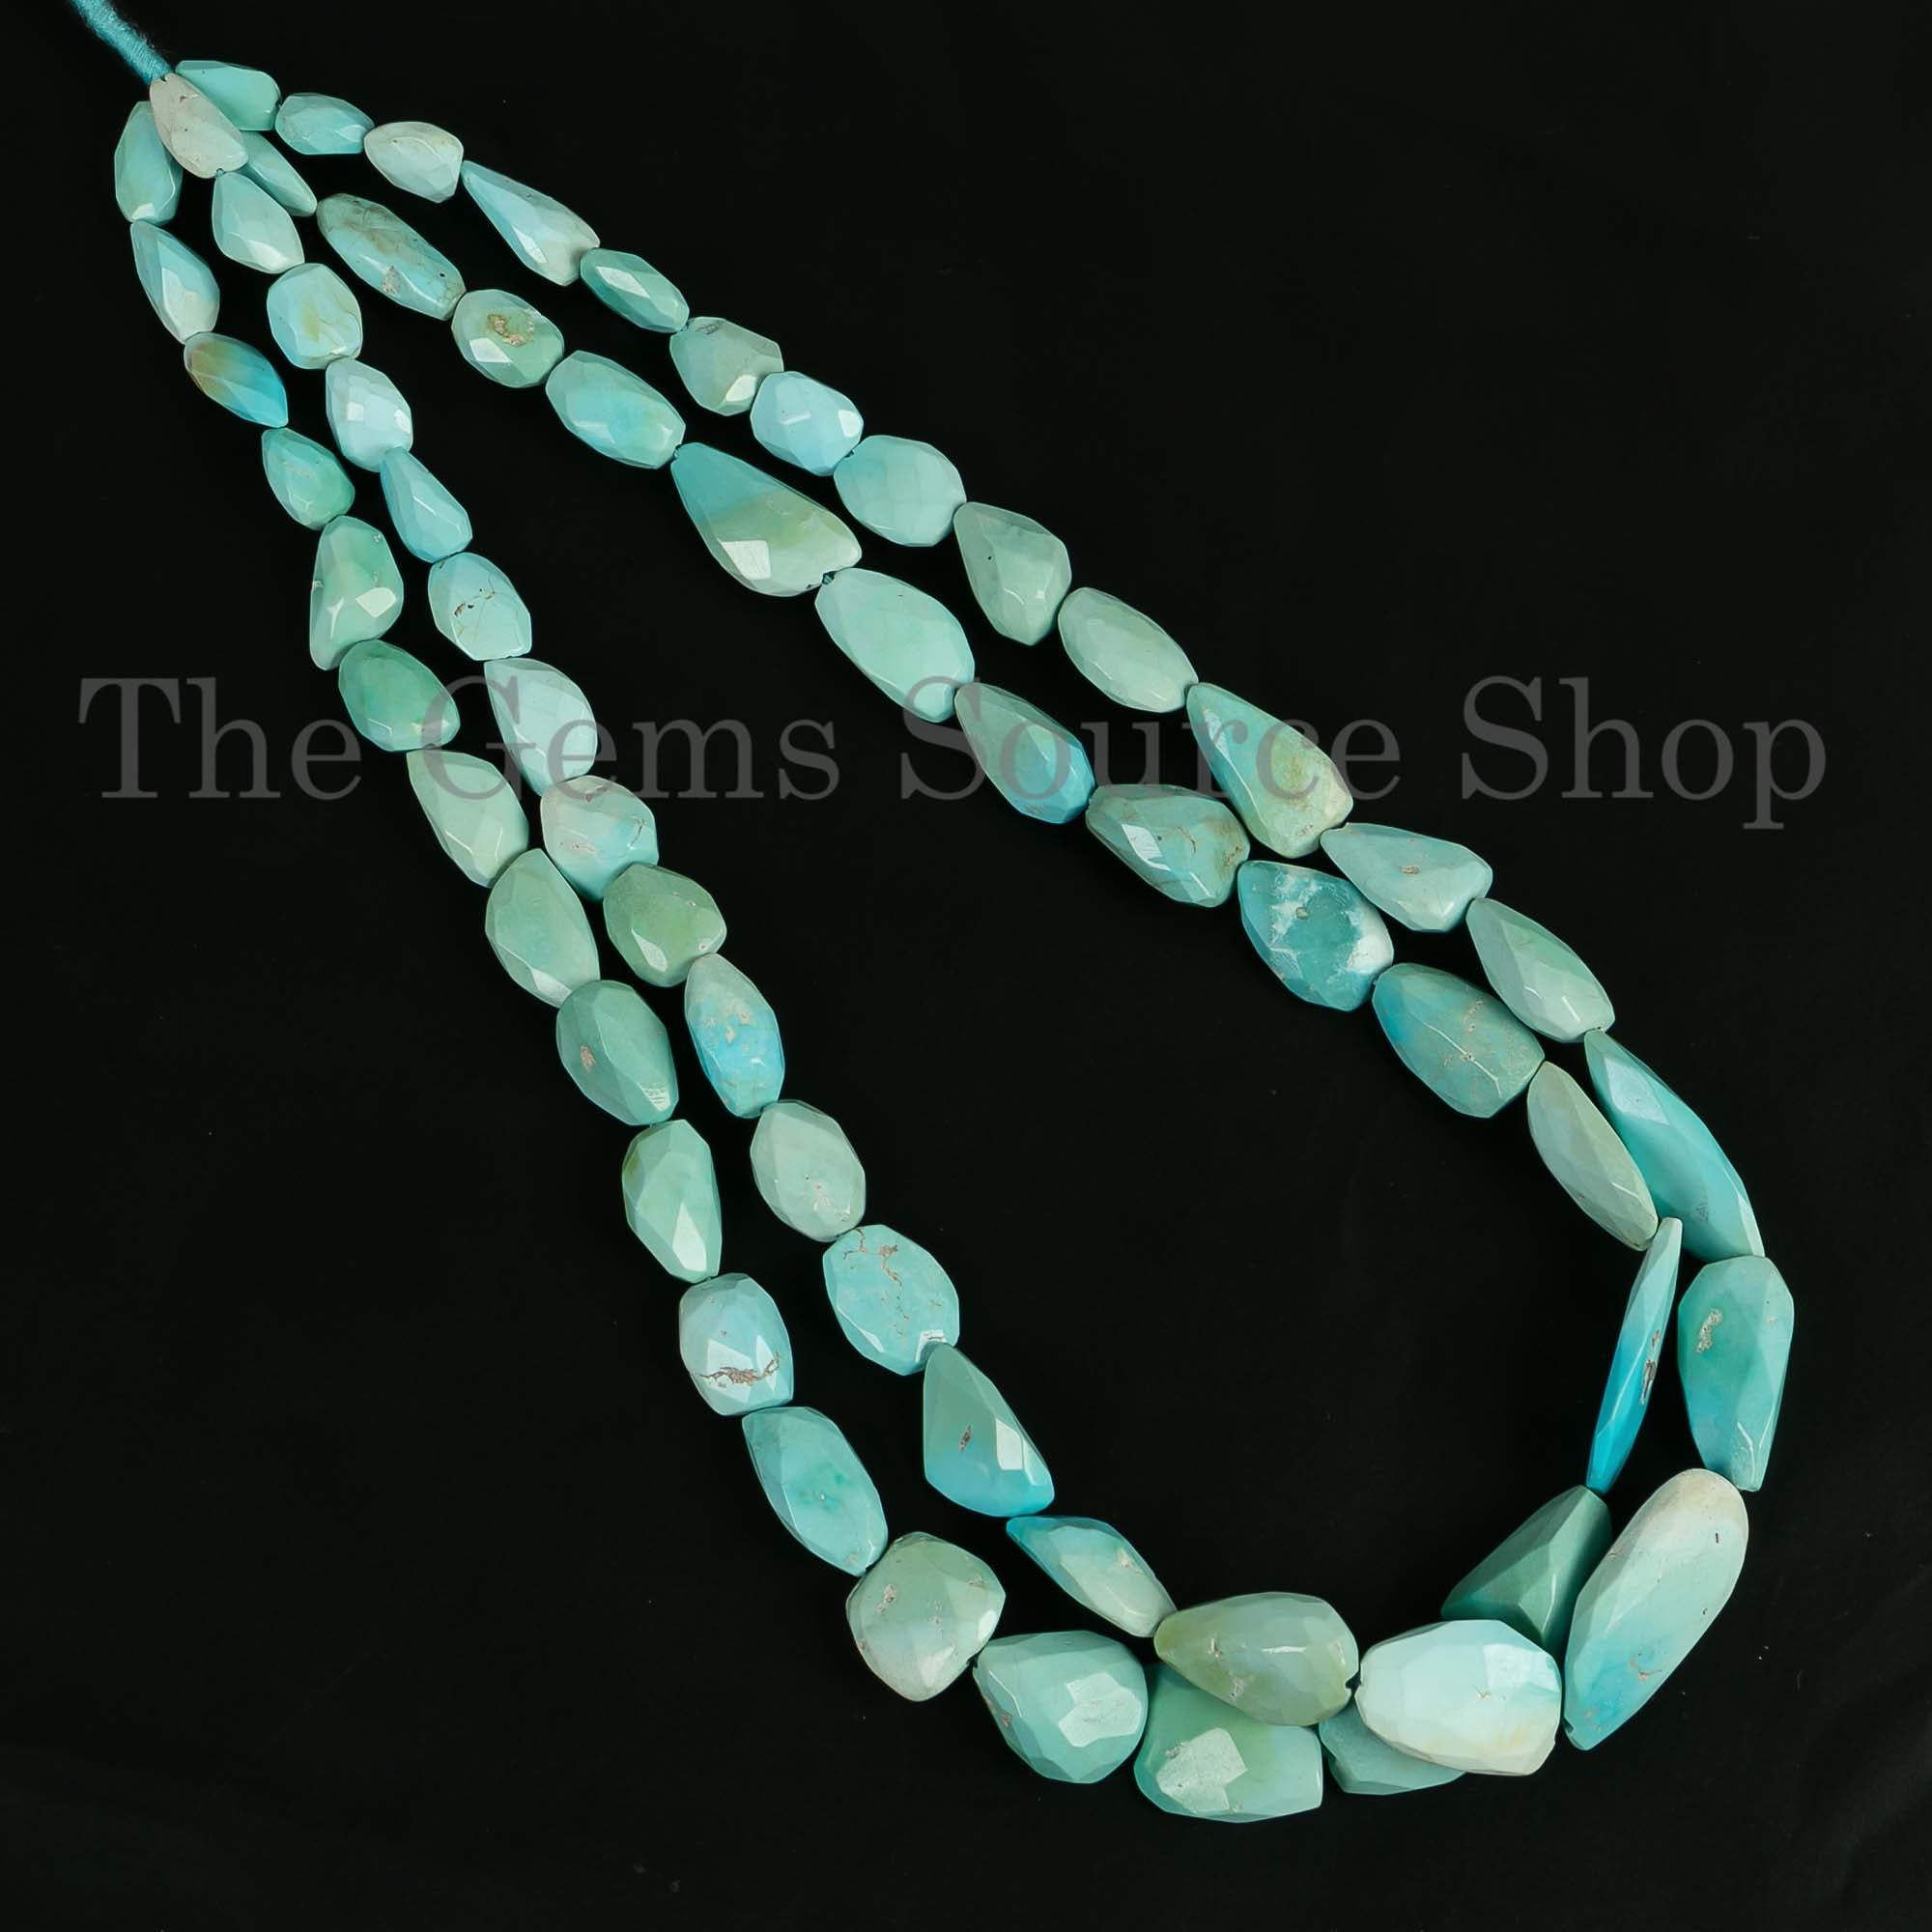 Natural Sleeping Beauty Turquoise Beads, Turquoise Briolette Tumbles, Loose Fancy Turquoise Nuggets